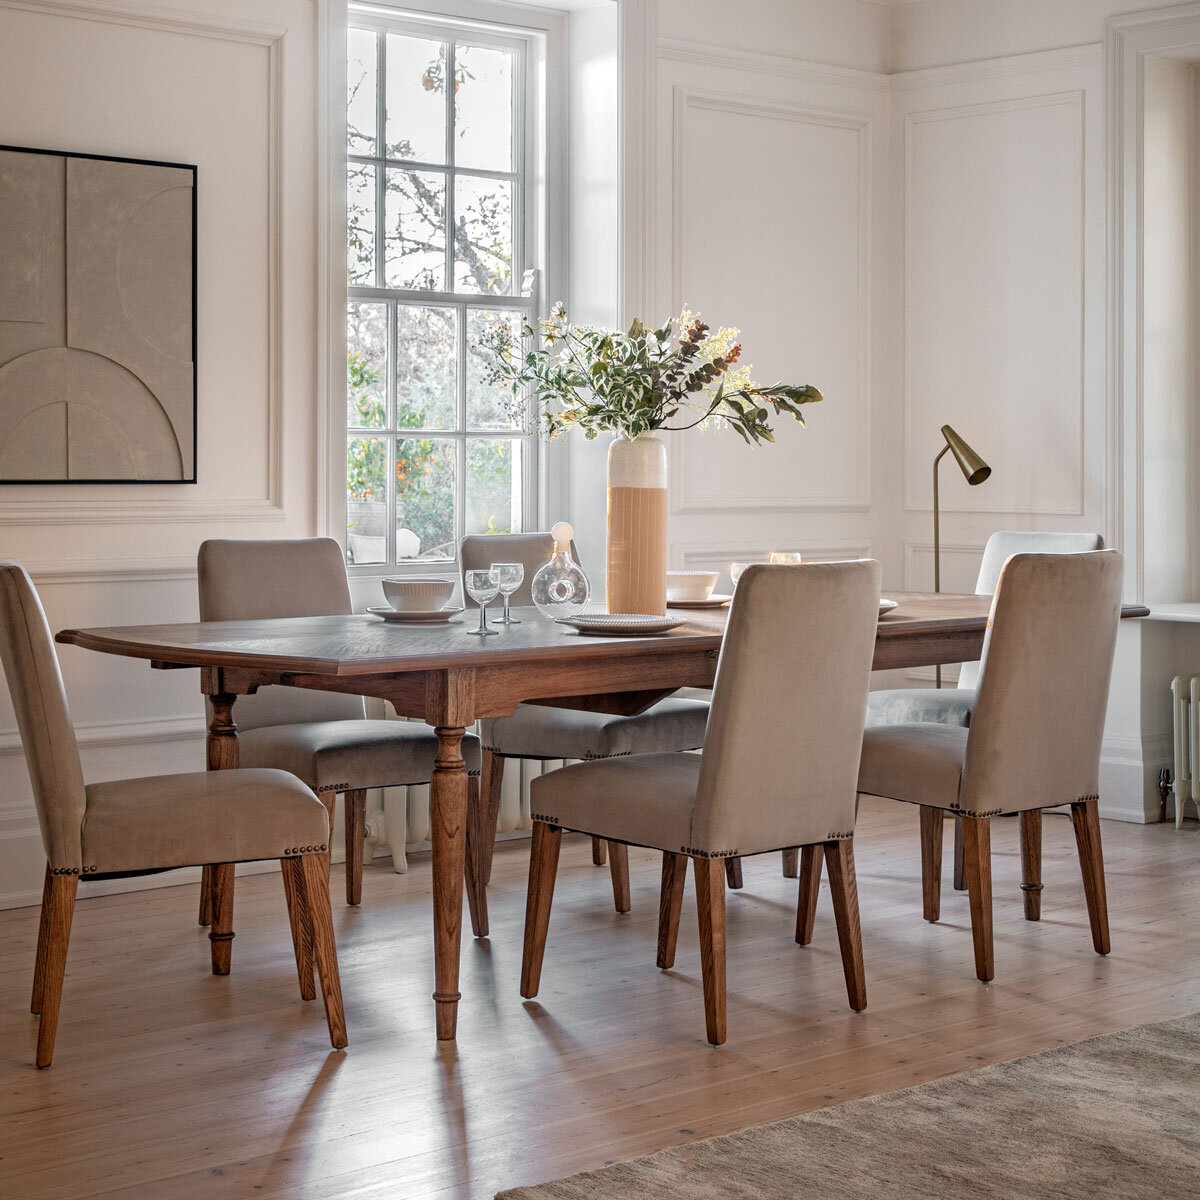 Gallery Highgrove Extending Dining Table, Seats 6- 8